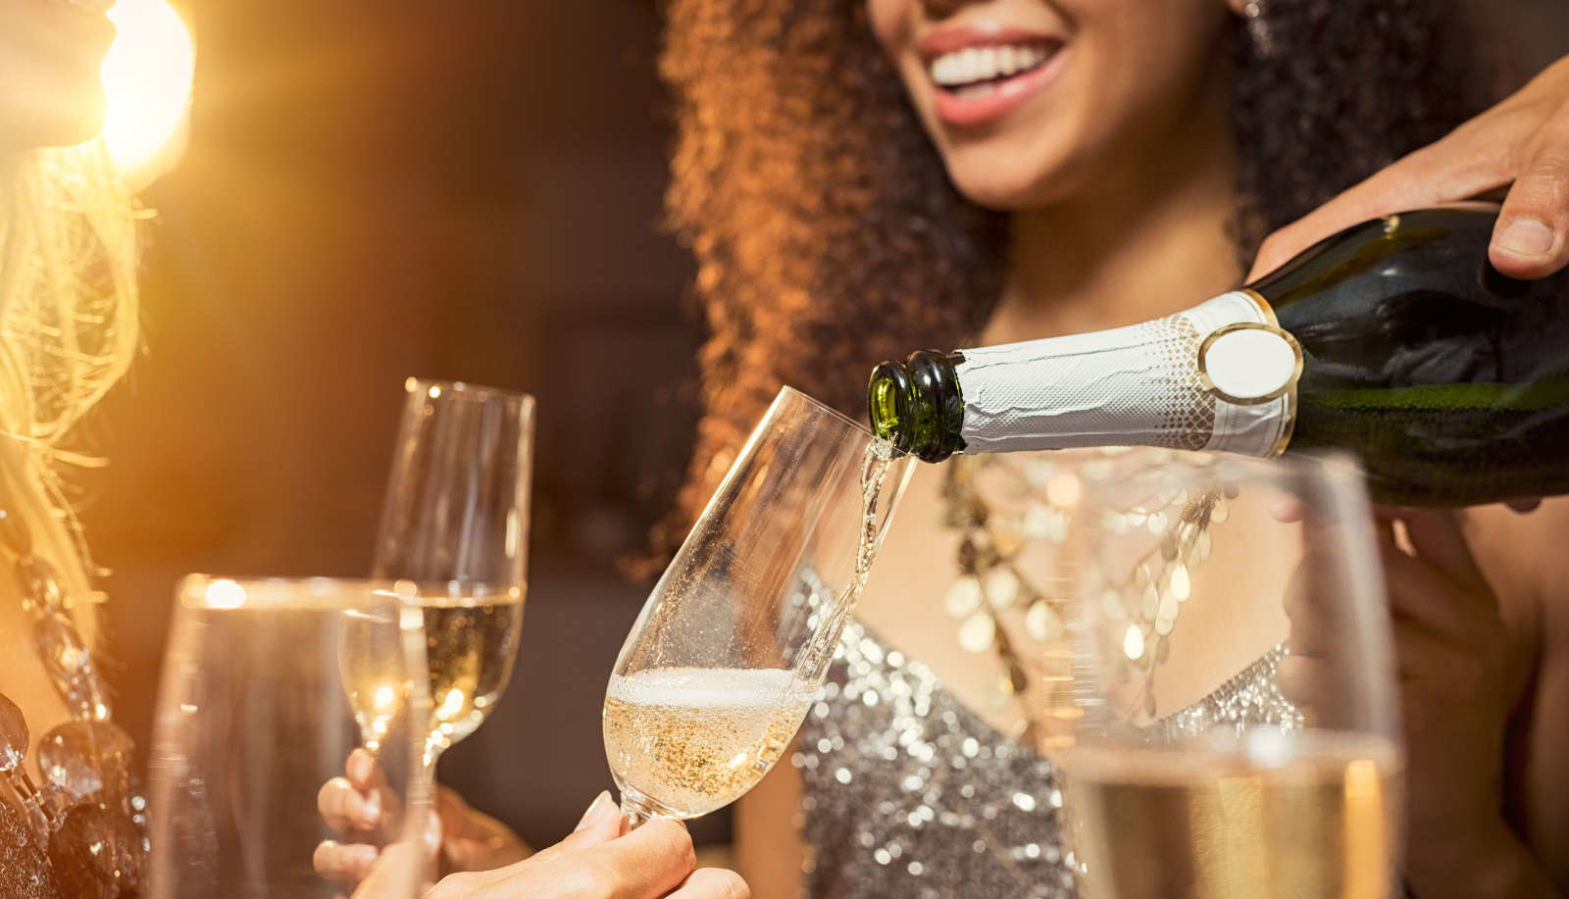 Difference between prosecco and champagne guide - sparkling wine pouring into a glass - body image